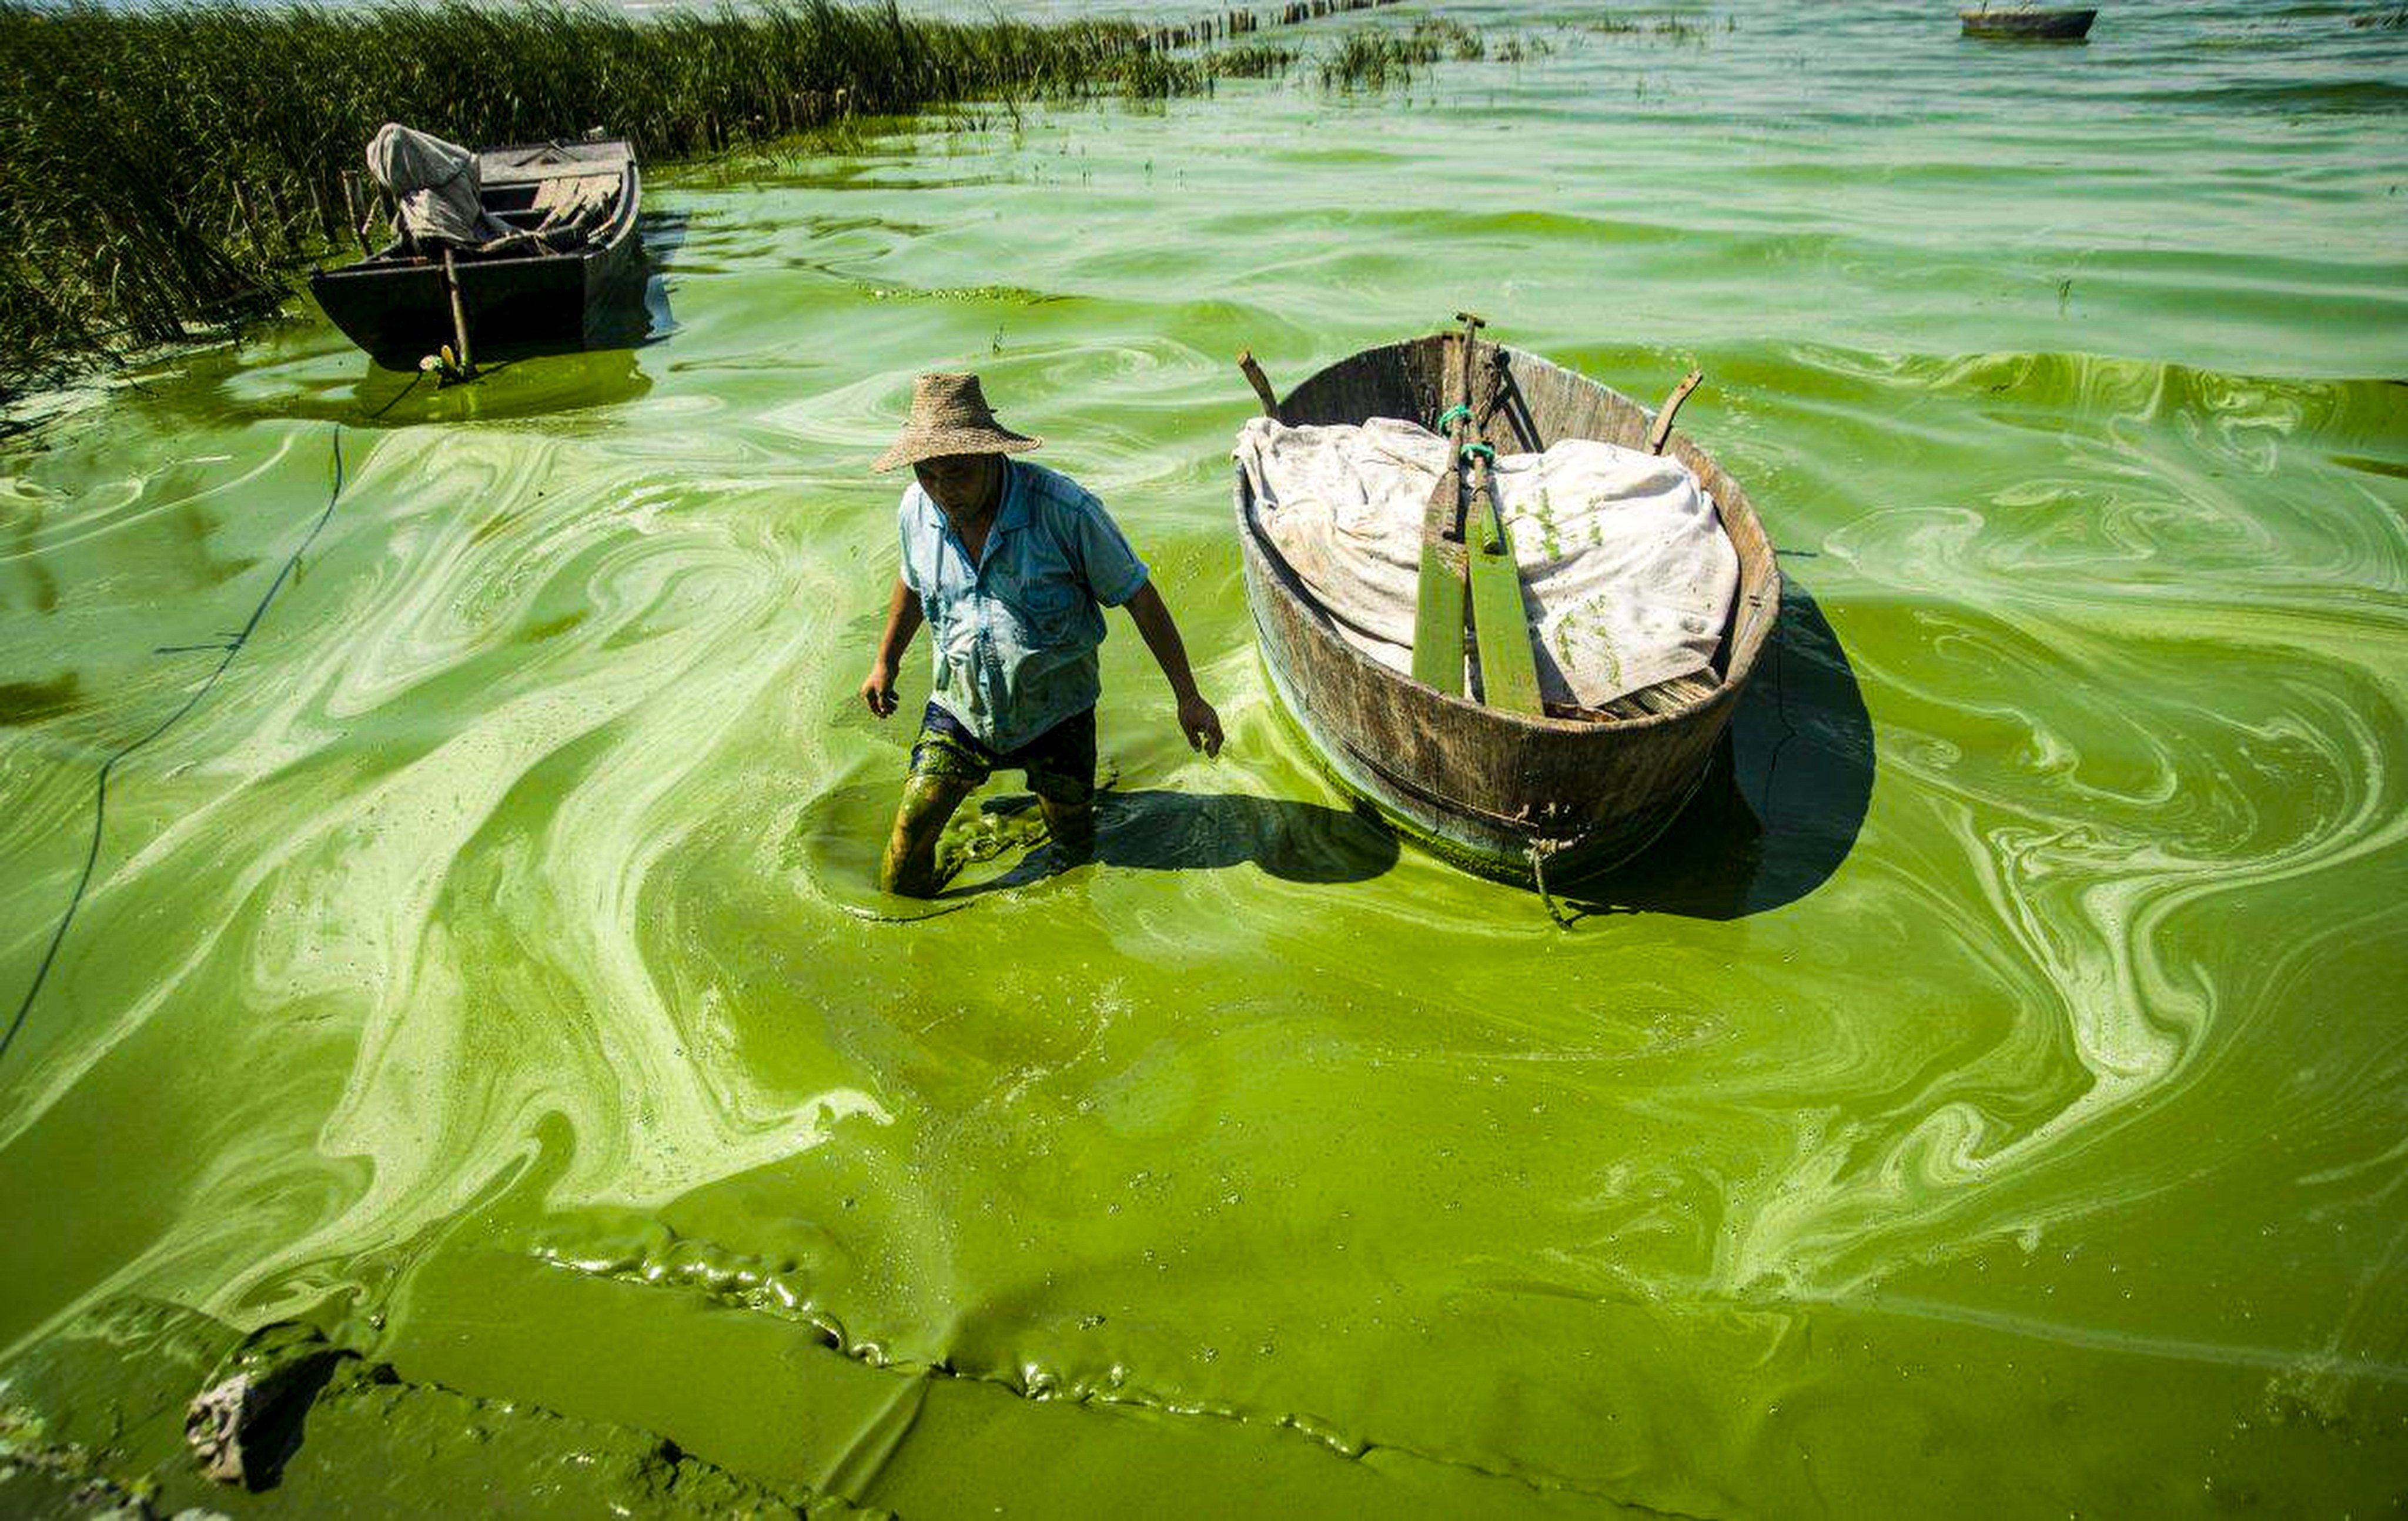 Nitrogen pollution can lead to harmful algal blooms in surface water, producing toxins that contaminate drinking water. Photo: X/WaterPolution20